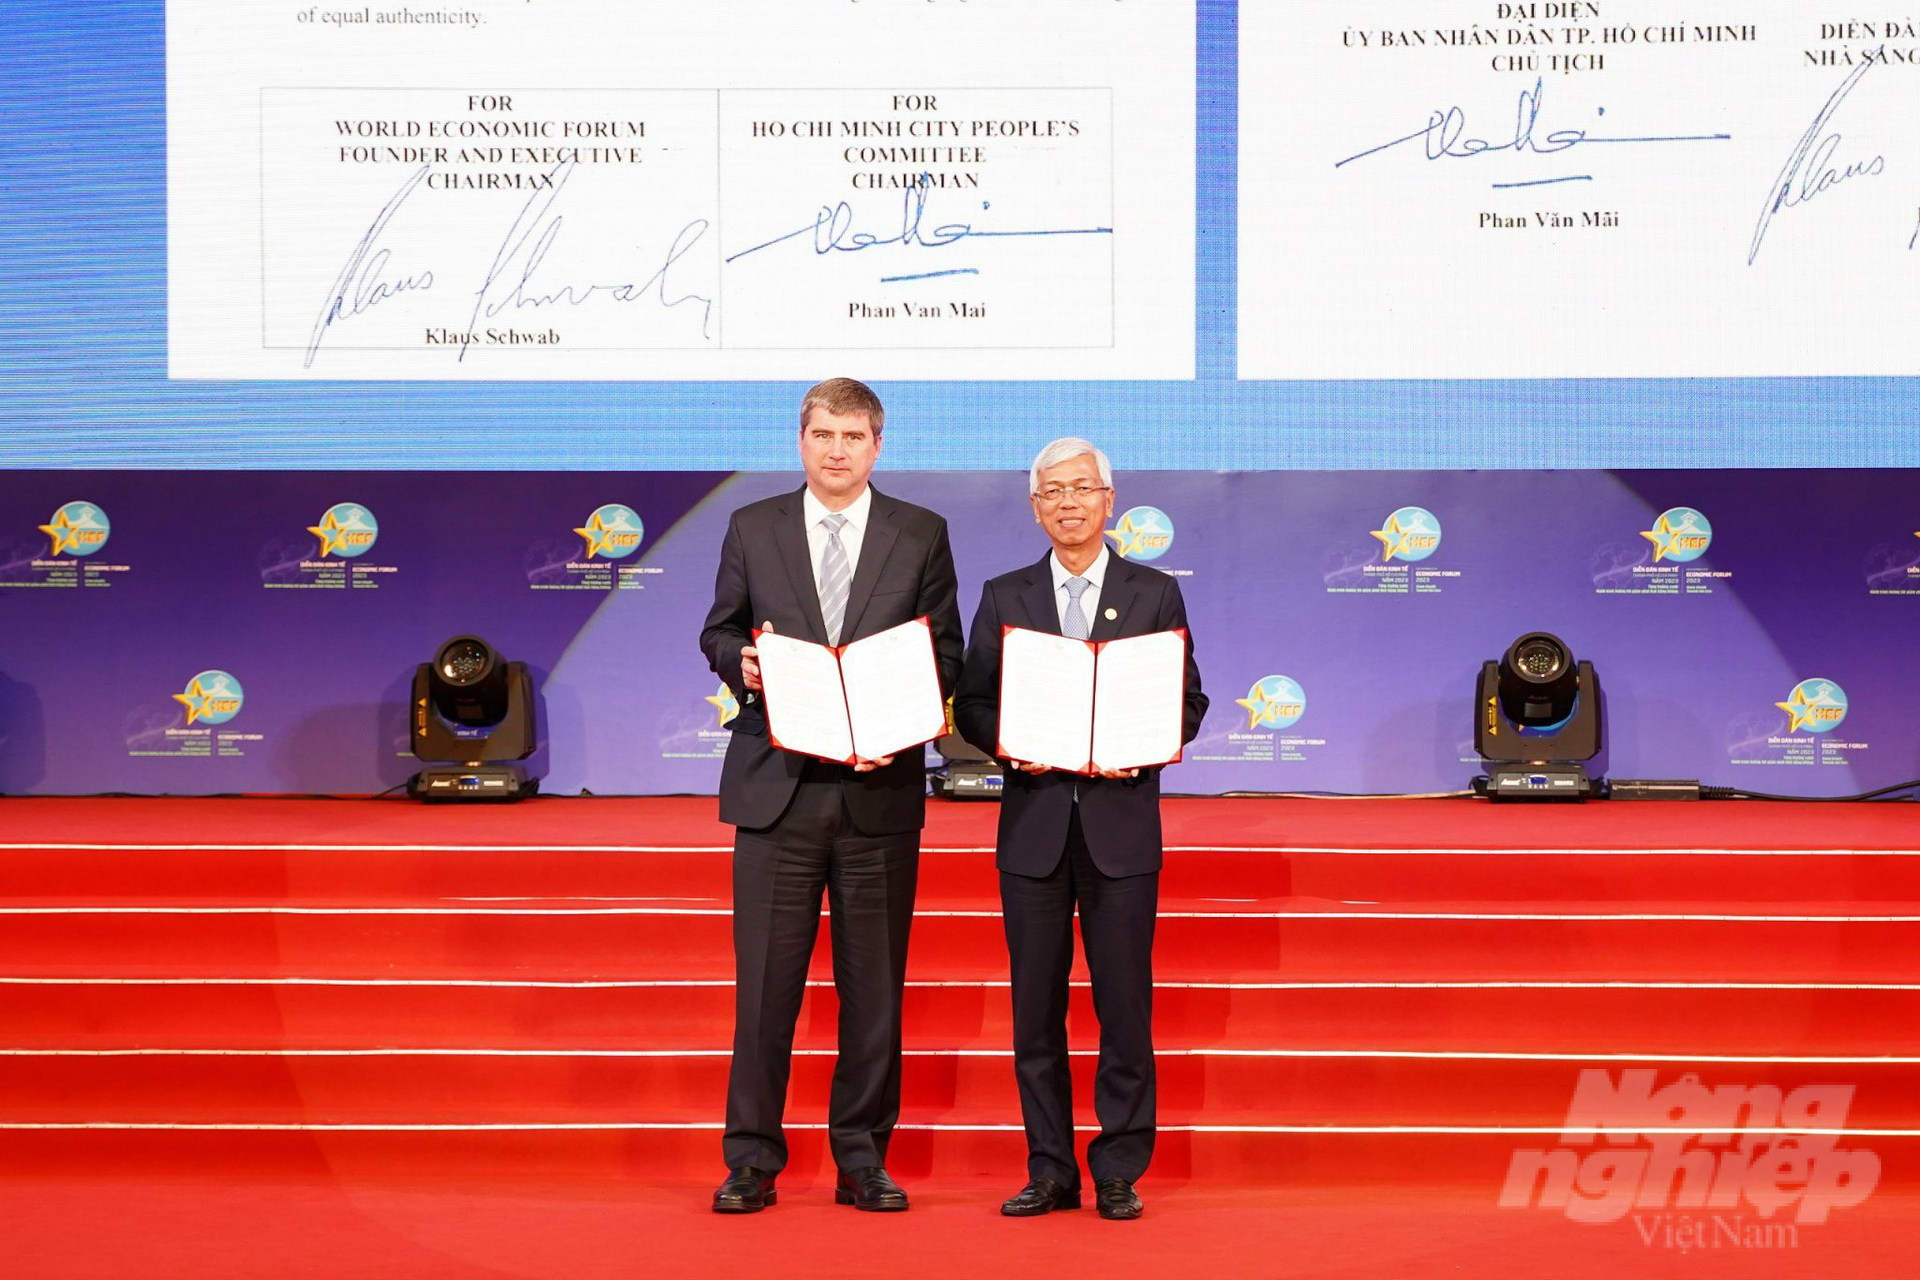 Vice Chairman of Ho Chi Minh City People's Committee Vo Van Hoan and Executive Director of the World Economic Forum (WEF) Jeremy Jurgens presented the Joint Statement between Ho Chi Minh City People's Committee and the World Economic Forum. Photo: Nguyen Thuy.